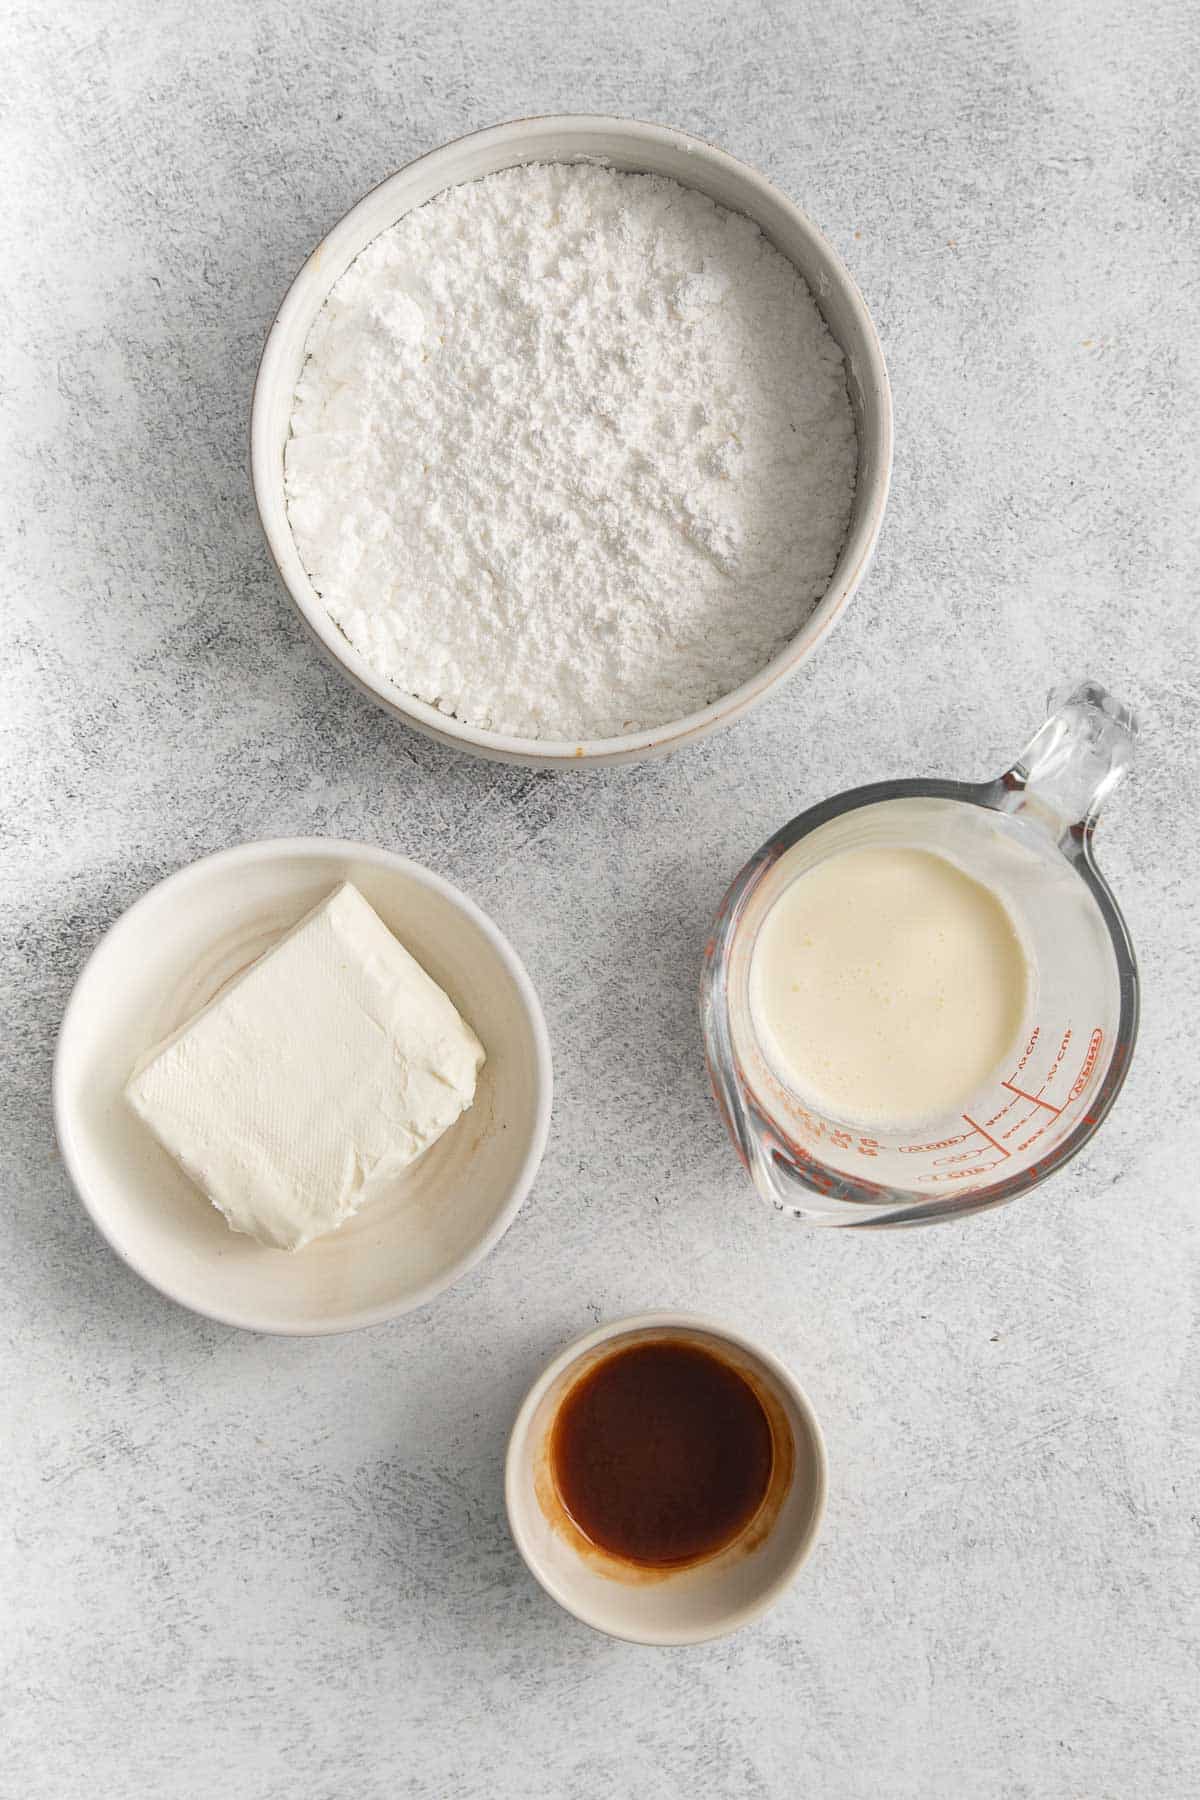 ingredients for cream cheese icing - powdered sugar, cream cheese, milk and vanilla extract.